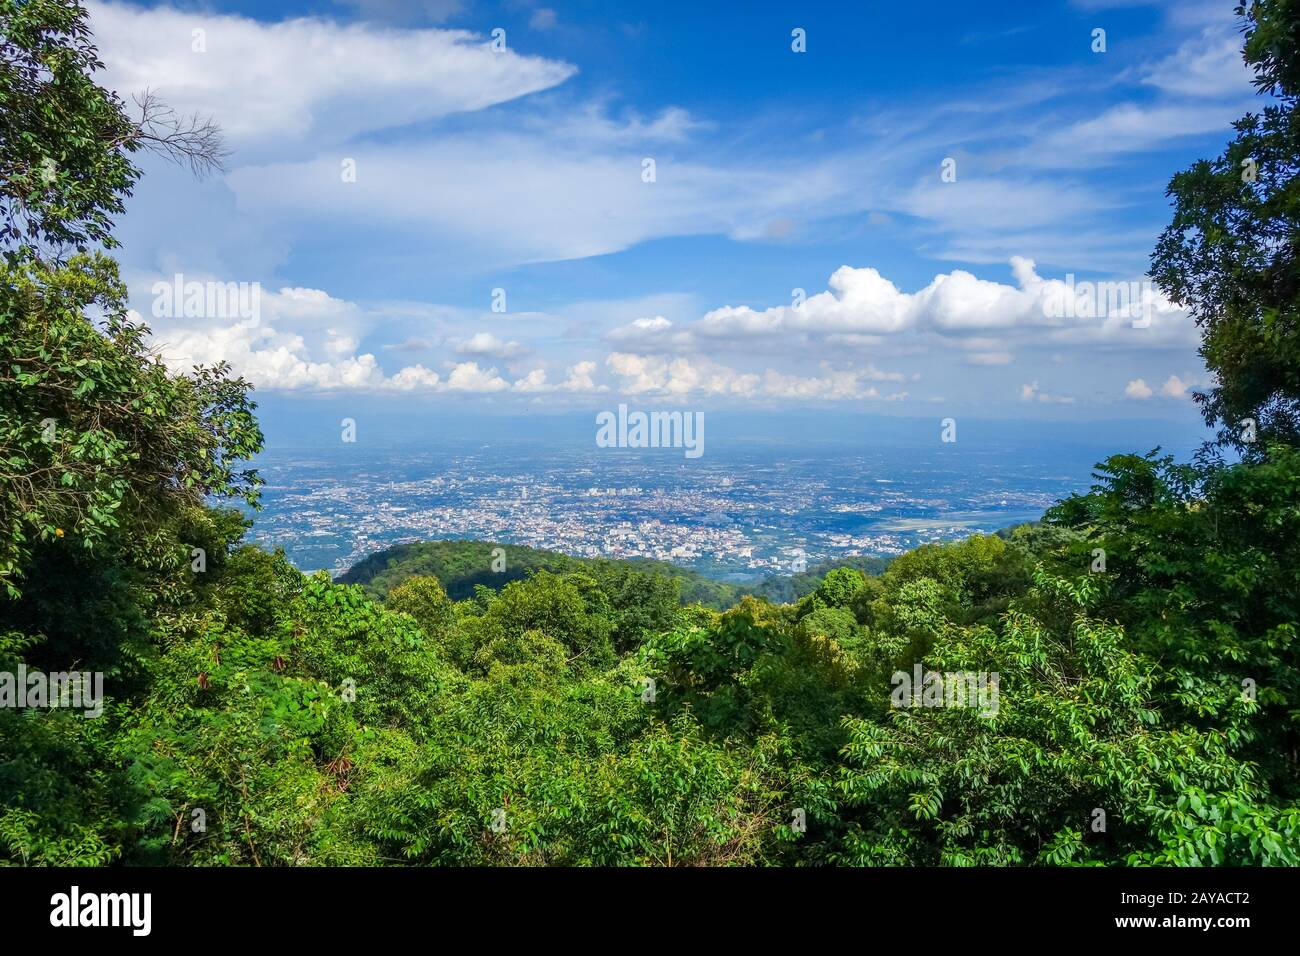 Chiang Mai, mountains and jungle landscape, Thailand Stock Photo